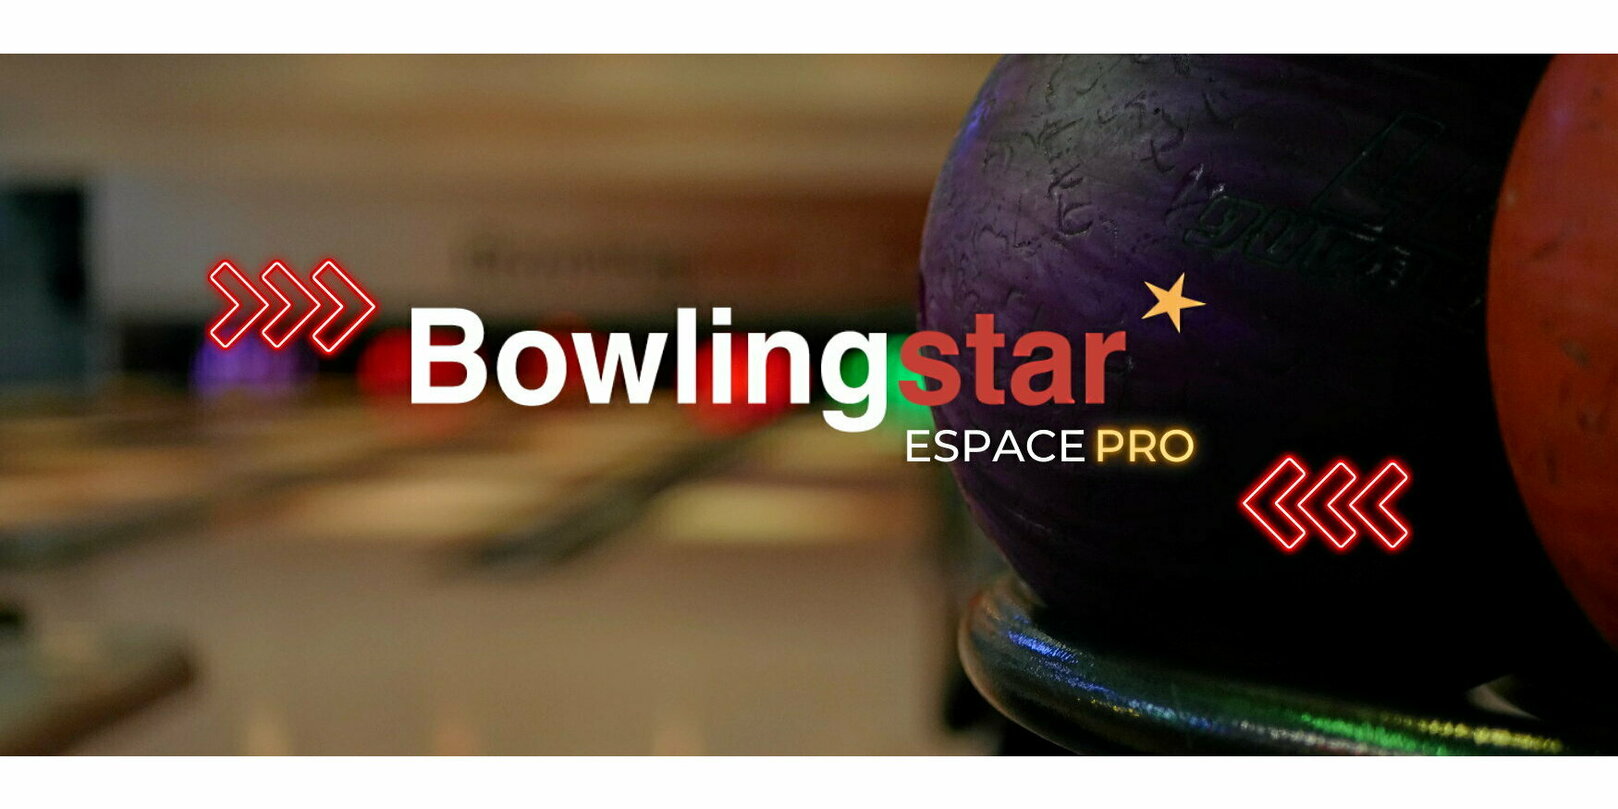 Bringing Fun and Team Building to the Workplace: Bowlingstar Invites Companies!